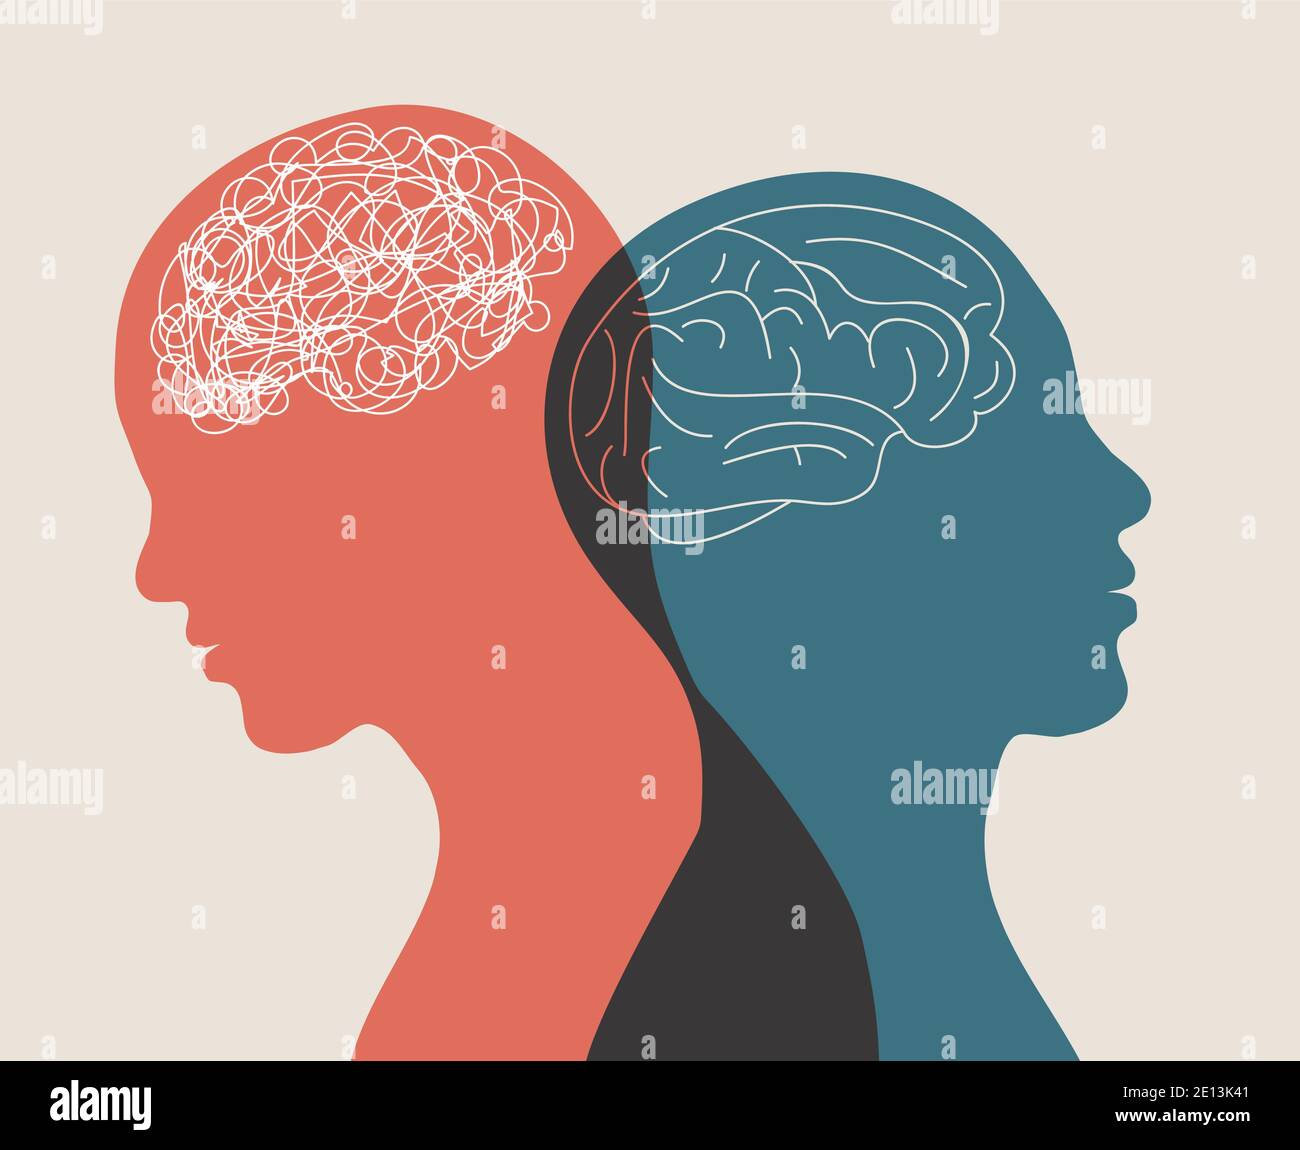 Metaphor bipolar disorder mind mental. Double face. Split personality. Concept mood disorder. 2 Head silhouette.Psychology. Mental health. Dual person Stock Vector